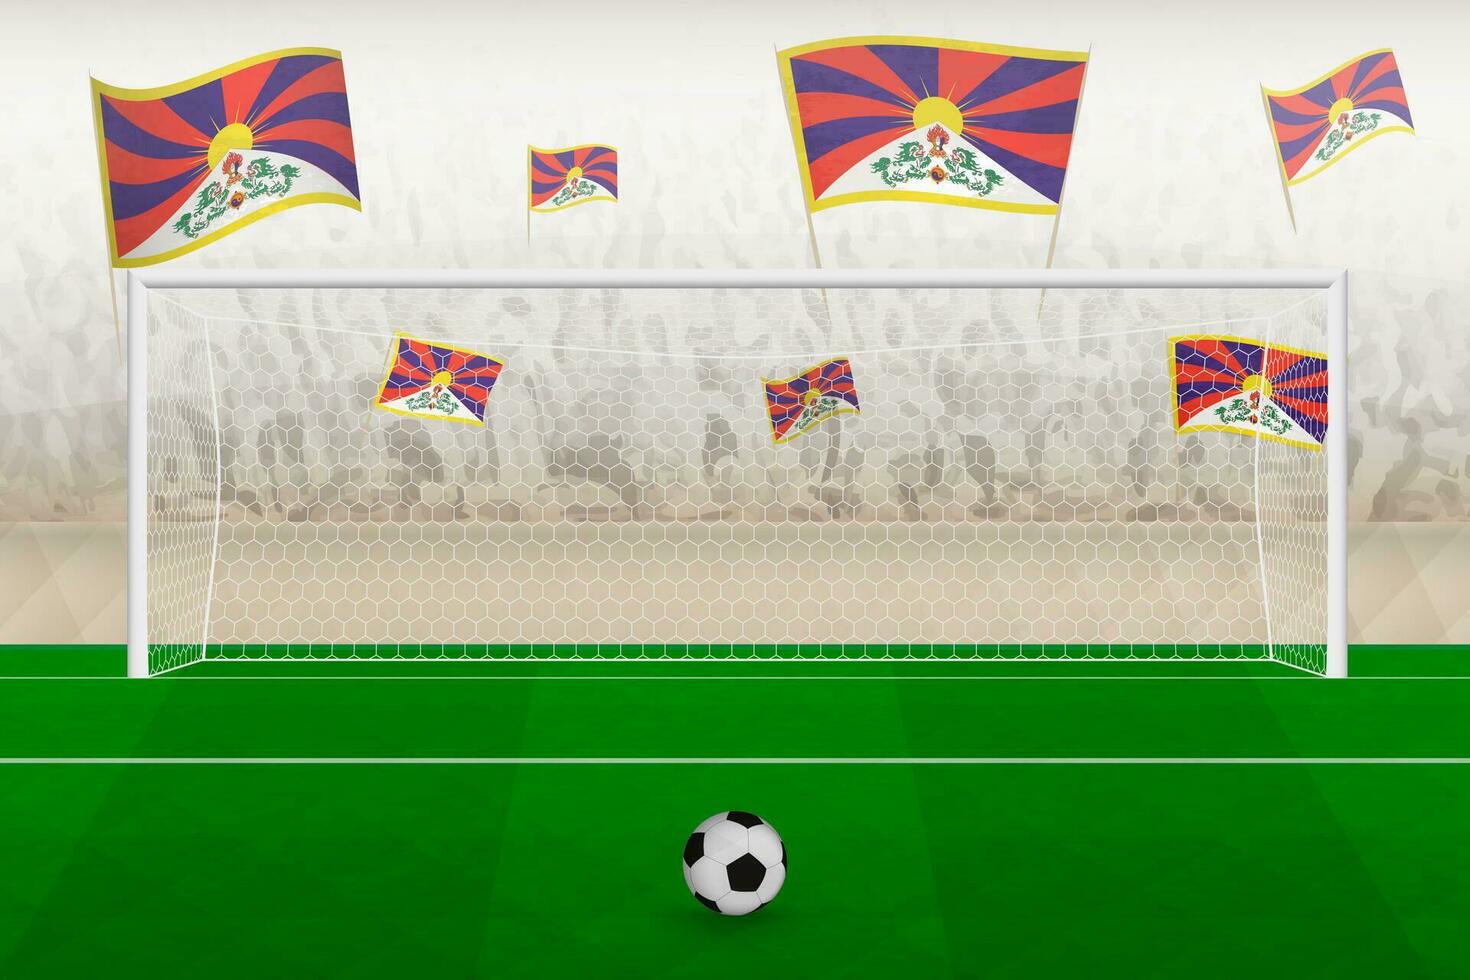 Tibet football team fans with flags of Tibet cheering on stadium, penalty kick concept in a soccer match. vector